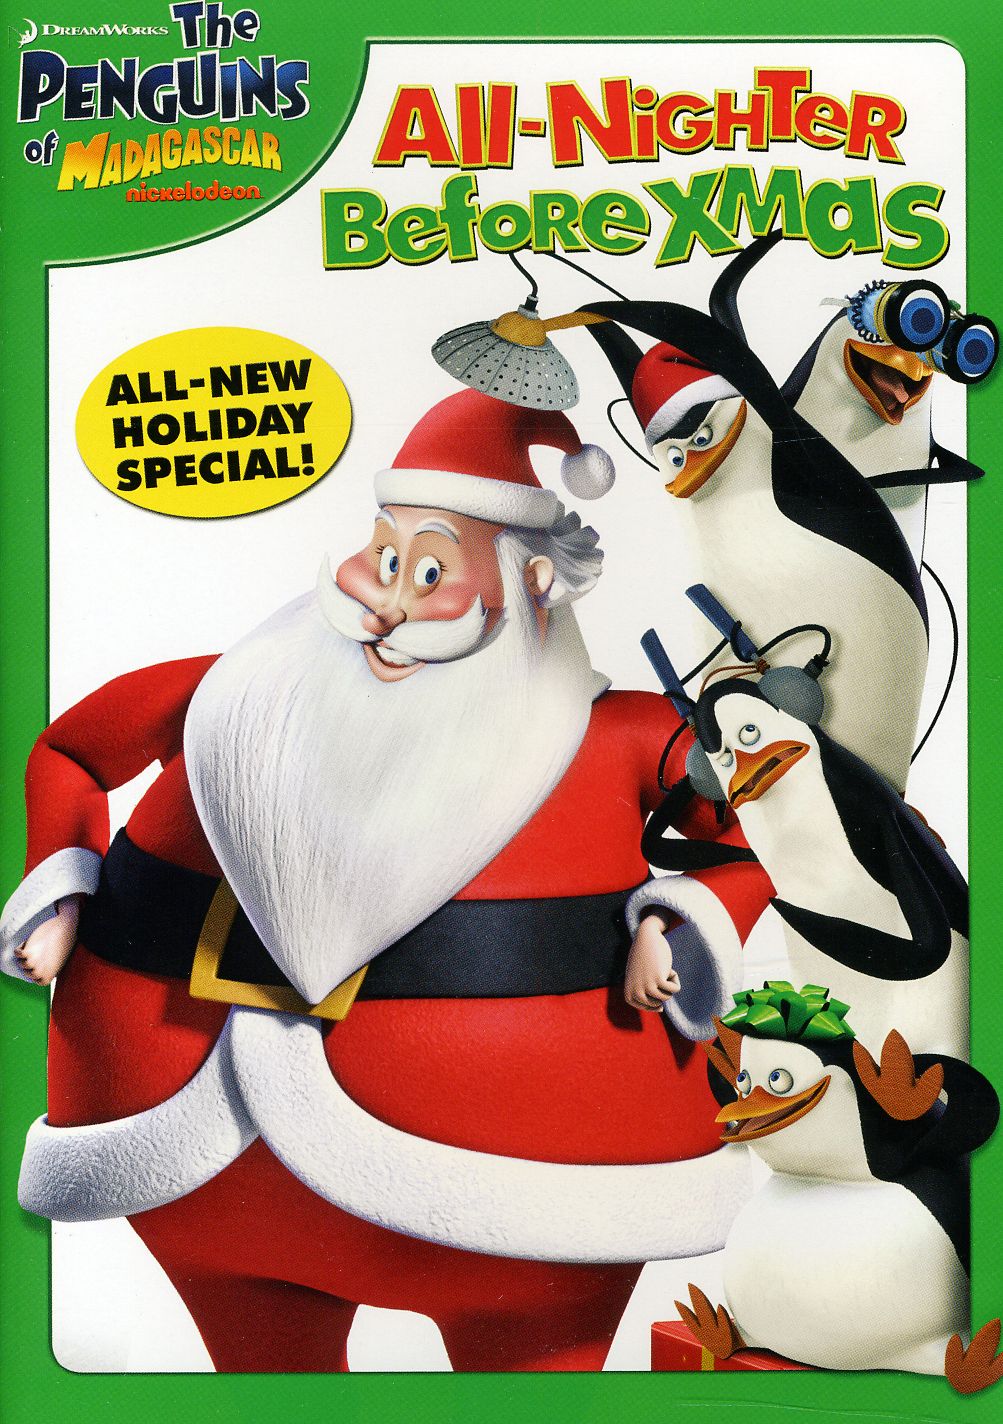 PENGUINS MADAGASCAR: THE ALL-NIGHTER BEFORE XMAS